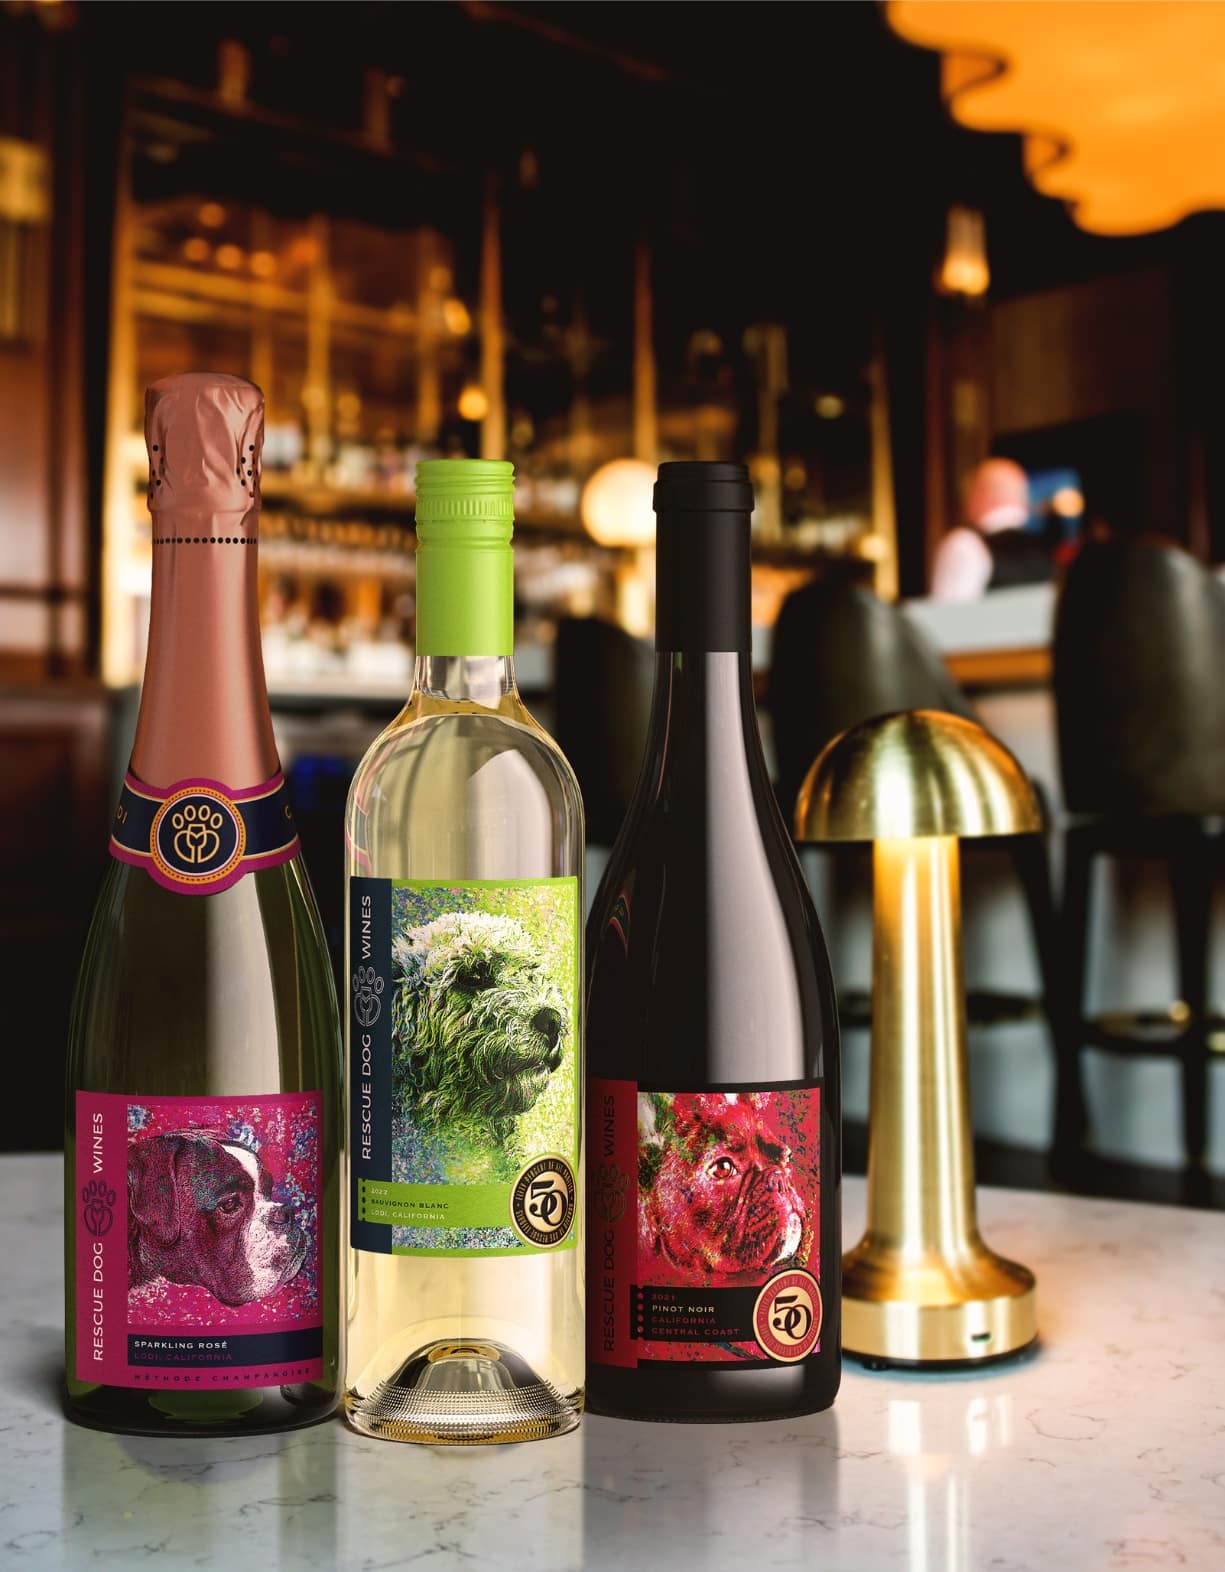 Find a Restaurant Near You | Rescue Dog Wines